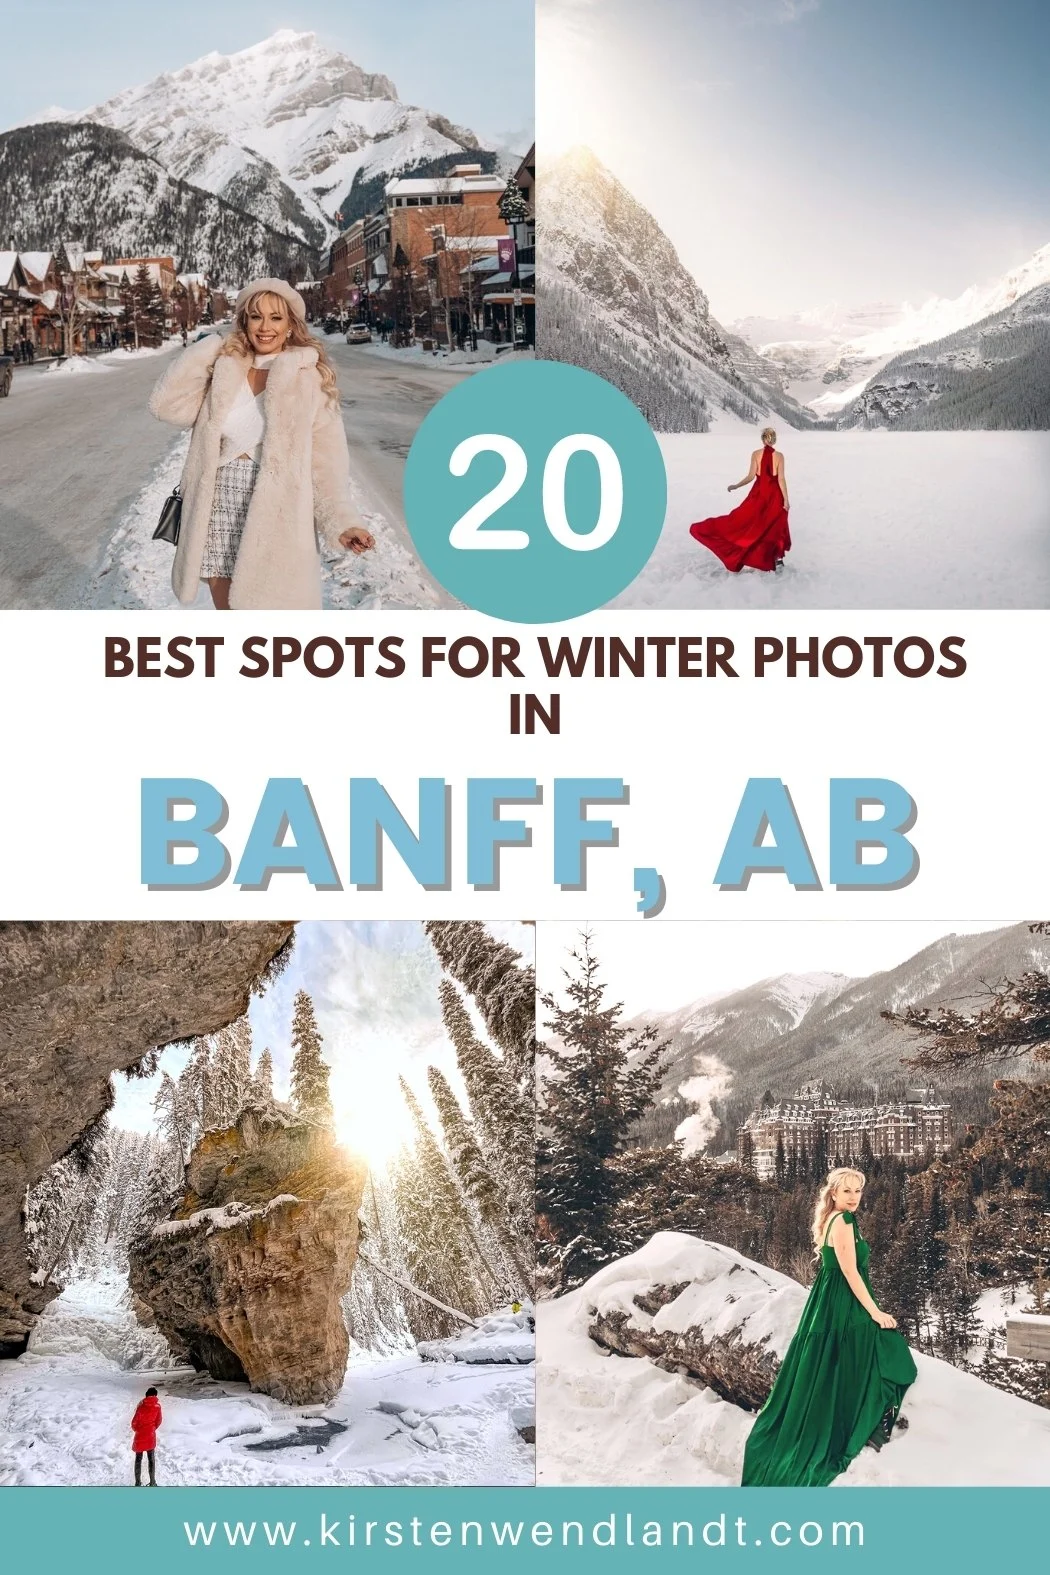 Banff in winter is absolutely magical! From the snow covered mountains to the stunning frozen lakes, charming log cabins and winter wildlife, there is just so much to experience in Banff in winter. If you’re planning a trip to Banff soon with the goal of taking some amazing winter pictures, you won’t want to miss this guide to the best spots for winter photos in Banff National Park